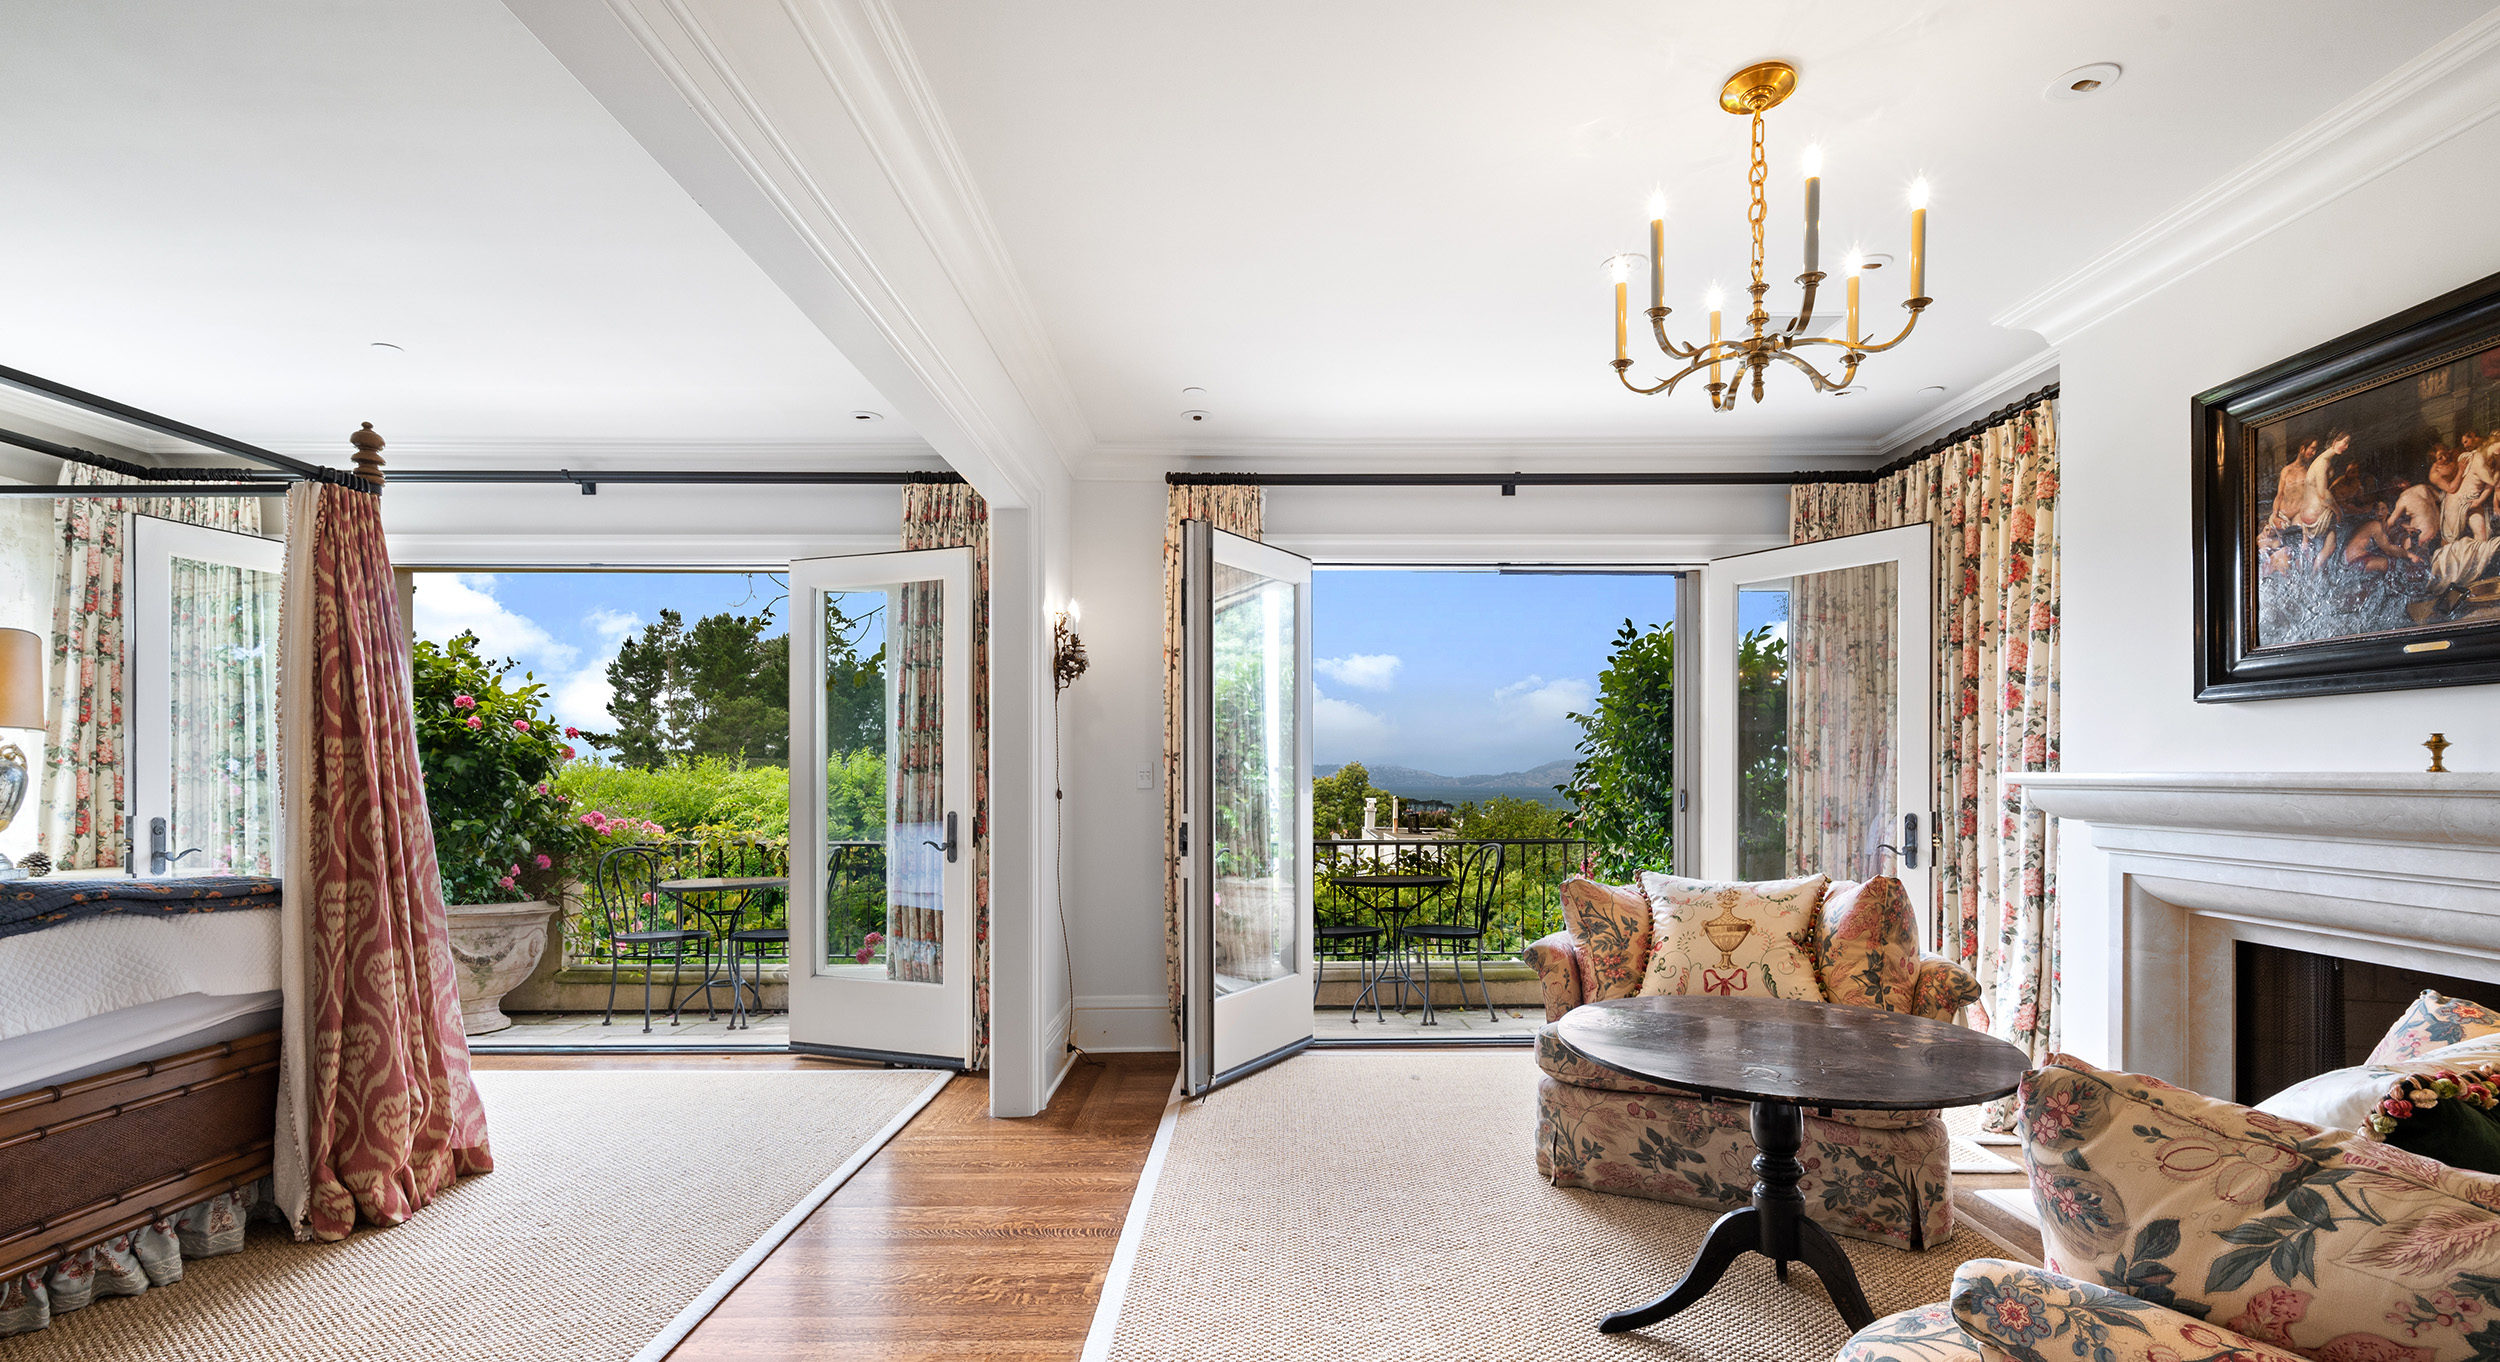 A large primary suite with views of the San Francisco bay visible via two large French doors